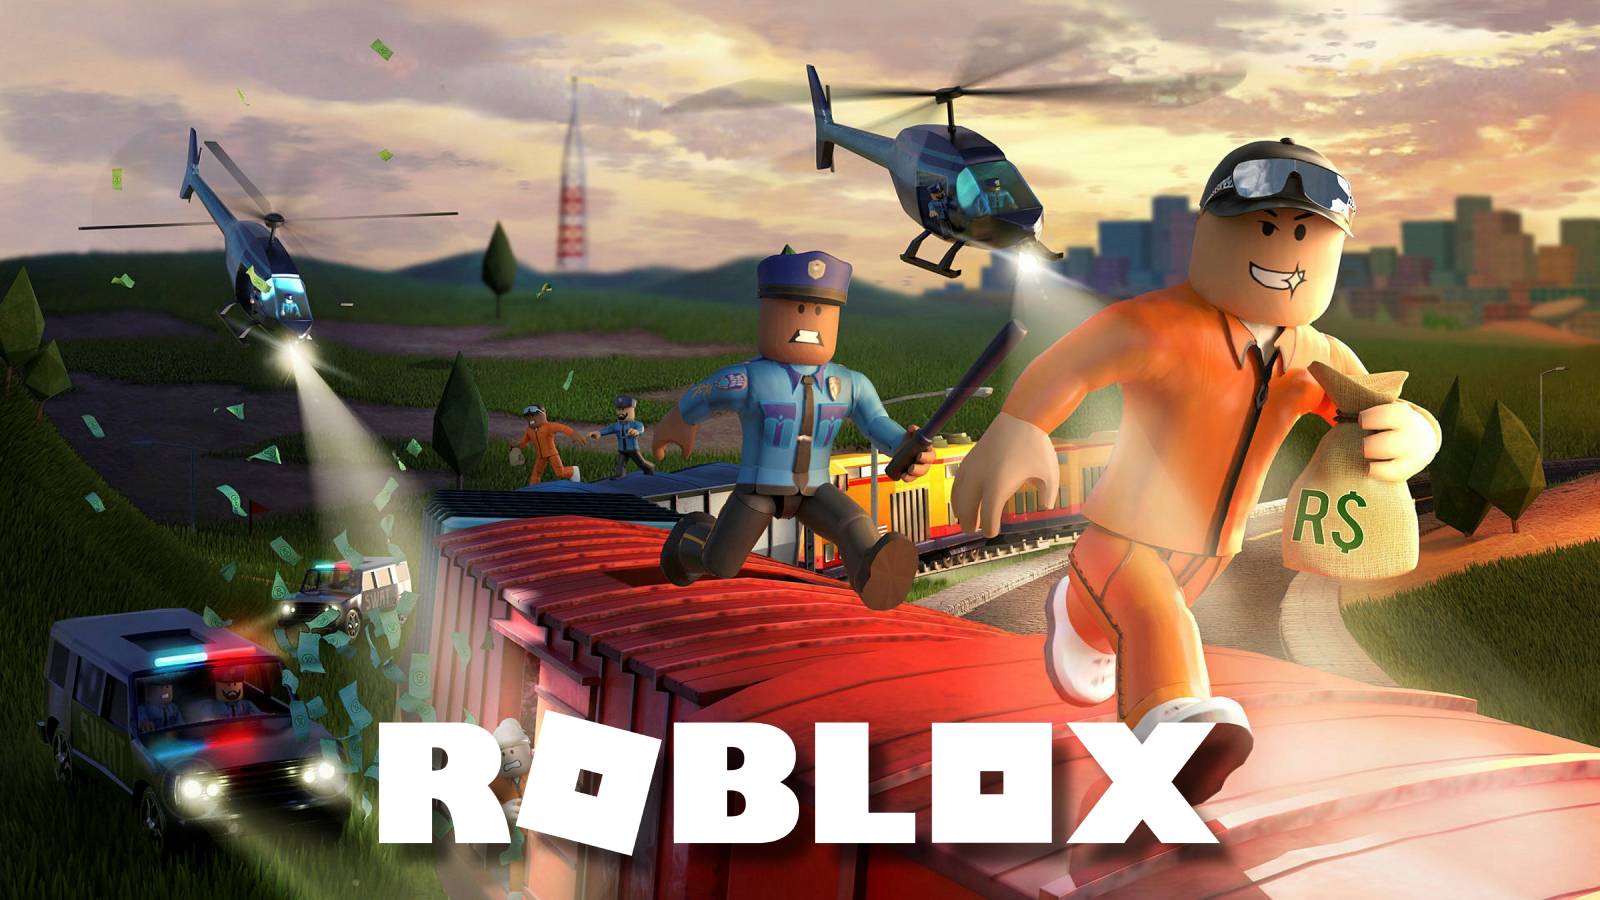 Court orders persistent 'Roblox' troll to stay off the platform